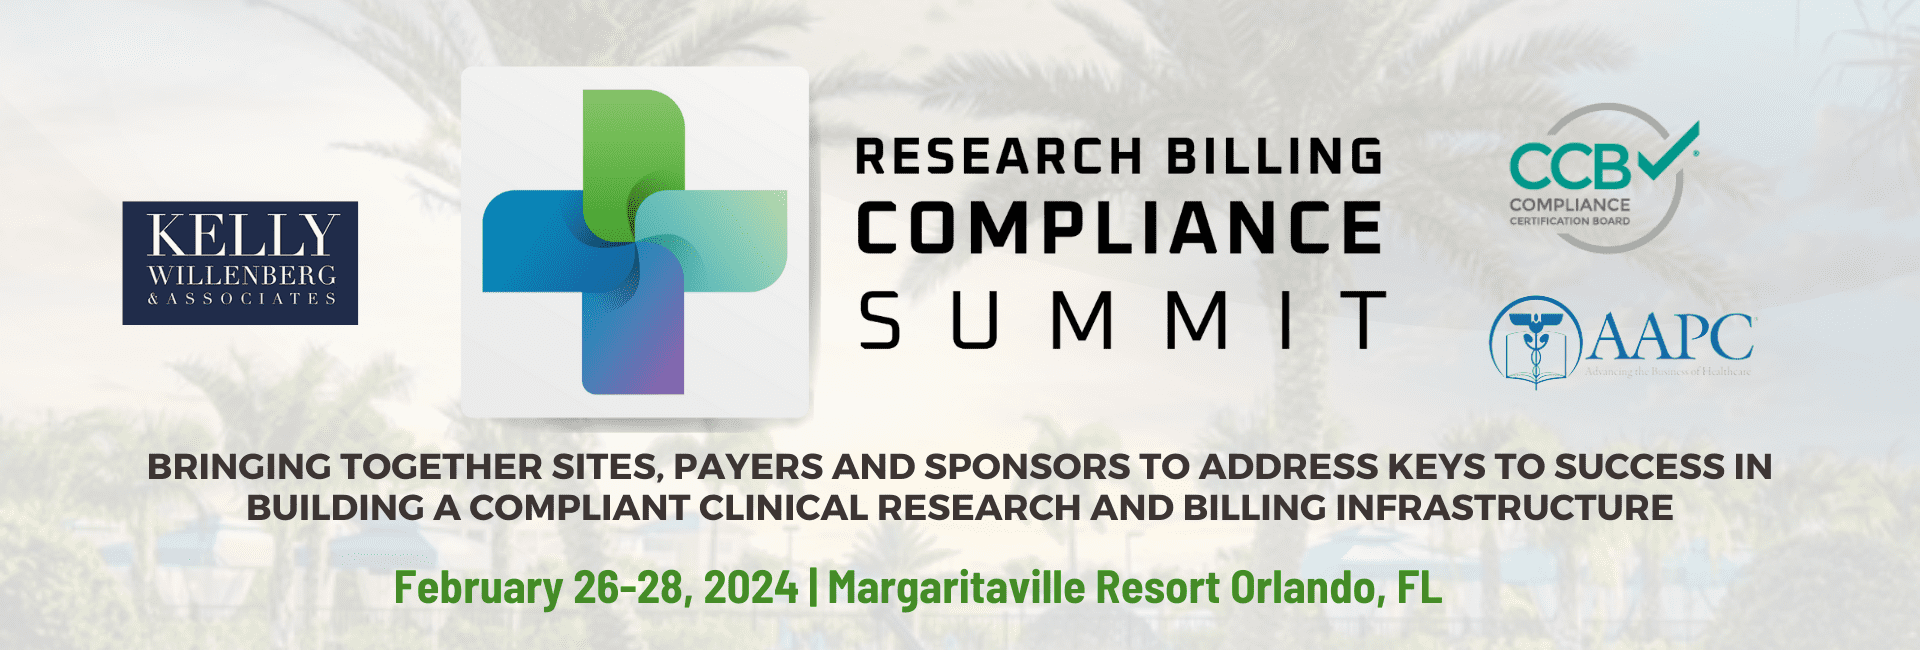 Hero banner of Research Billing Compliance Summit